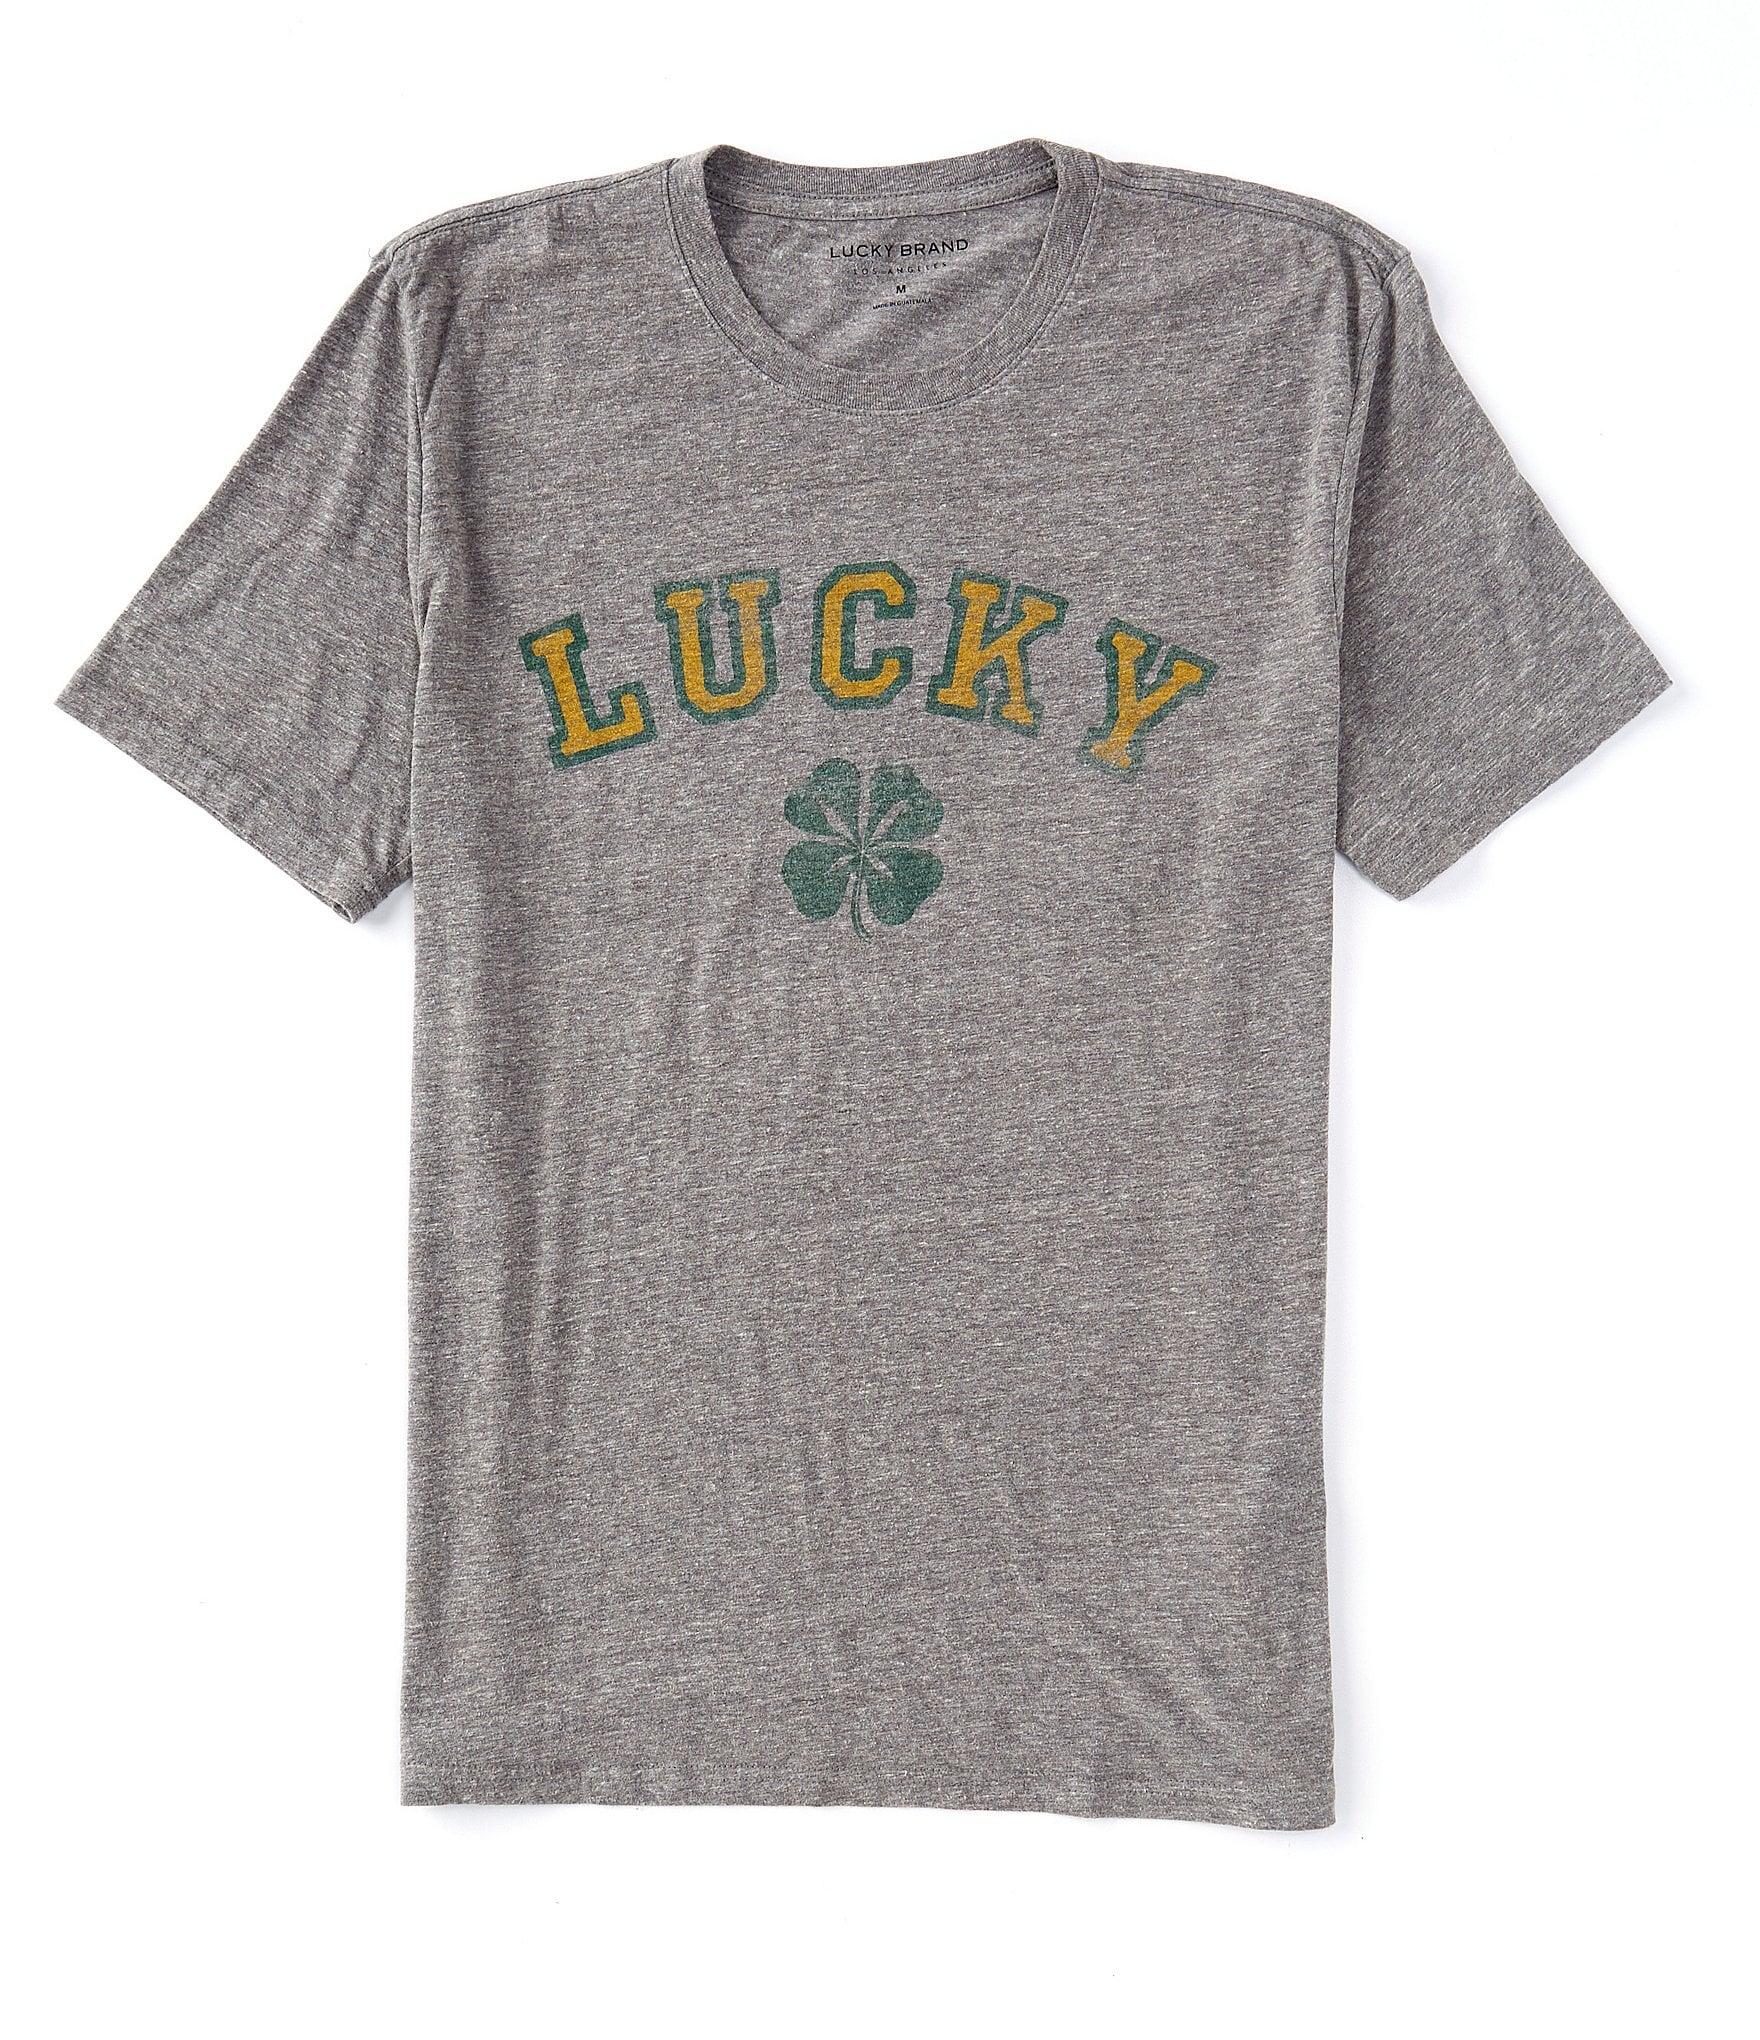 Trendy and Organic lucky brand t shirts for All Seasons 